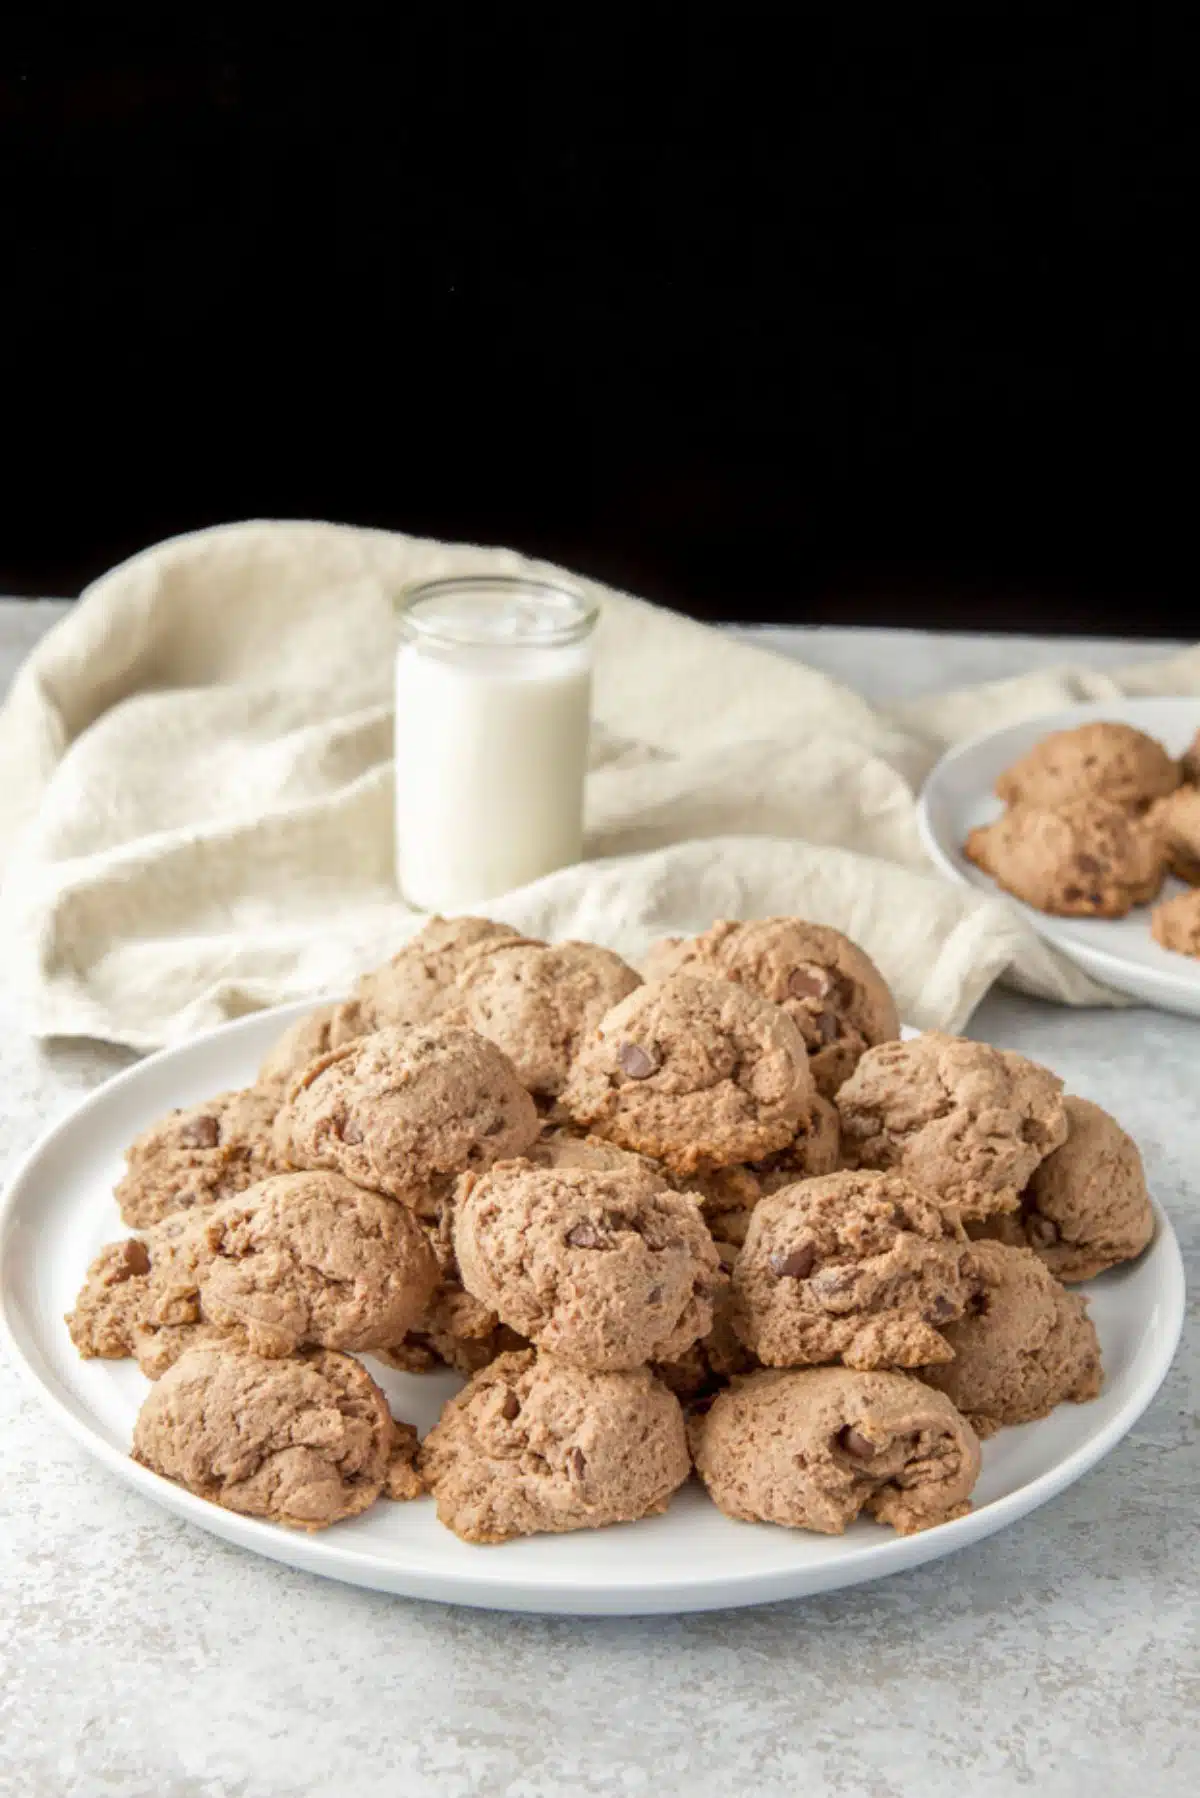 Pile of cookies on a big plate with a smaller plate of them in the background as well as a glass of milk